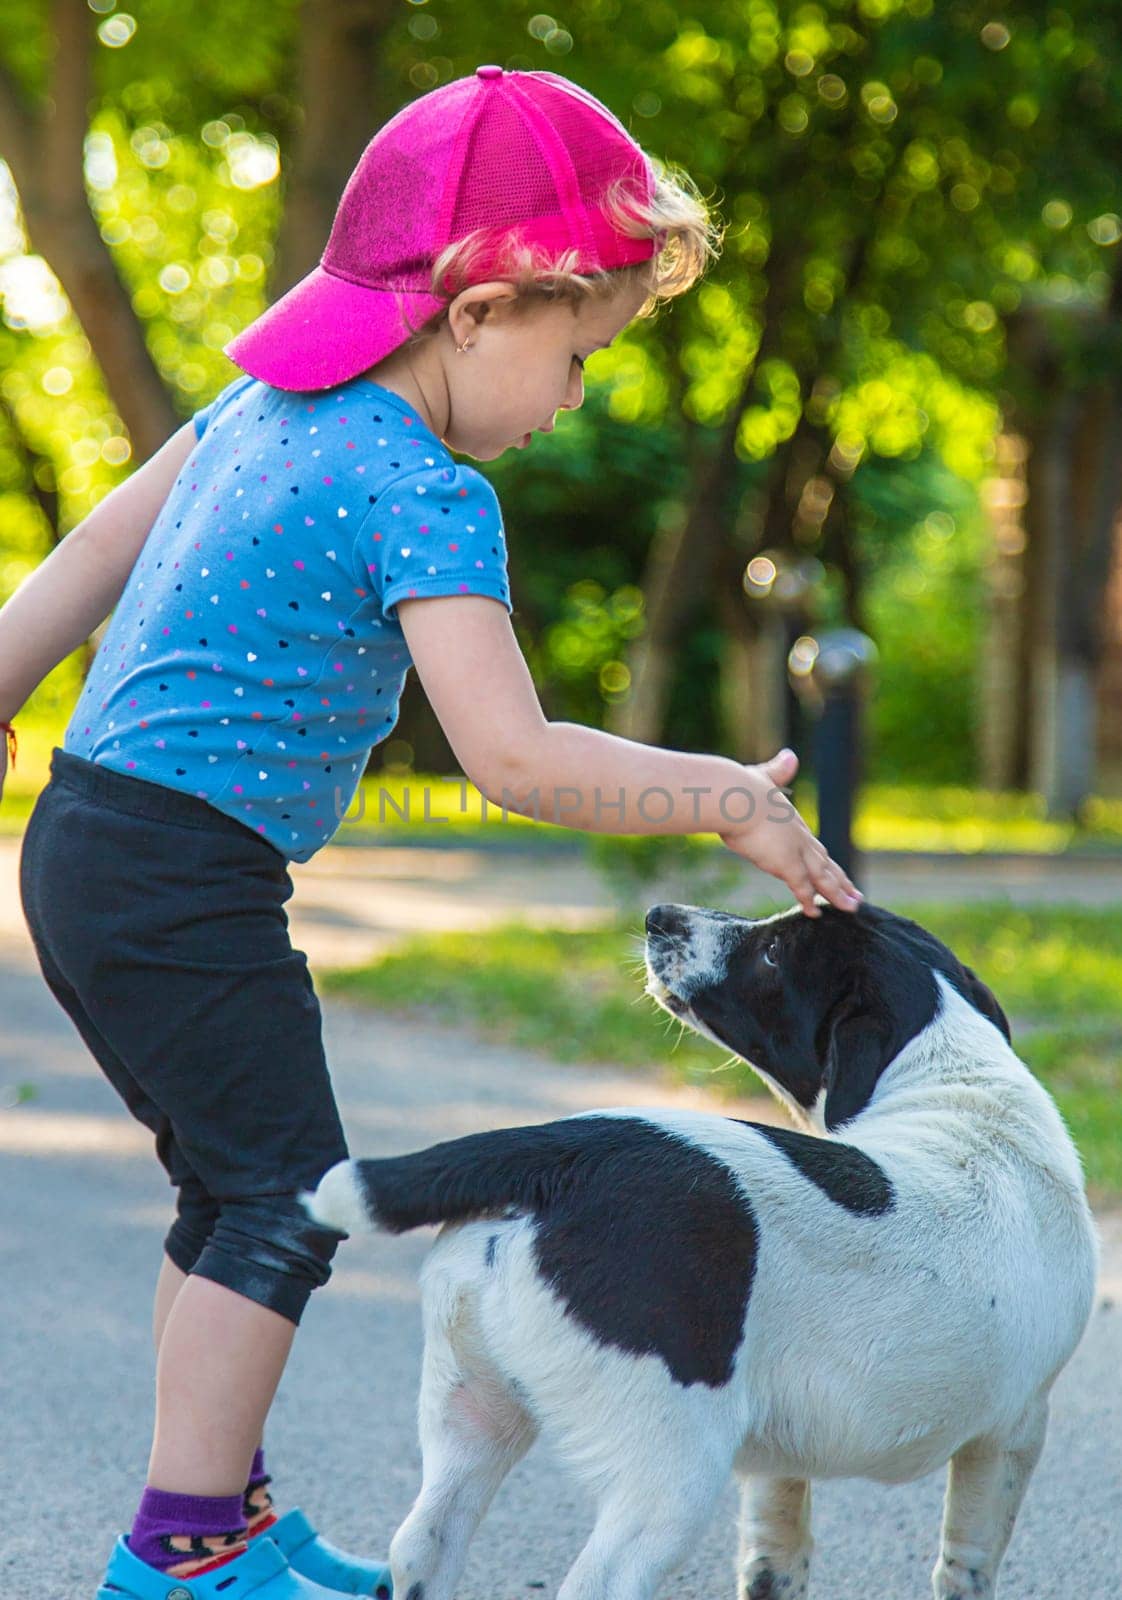 A child plays with a small dog in the park. Selective focus. Nature.